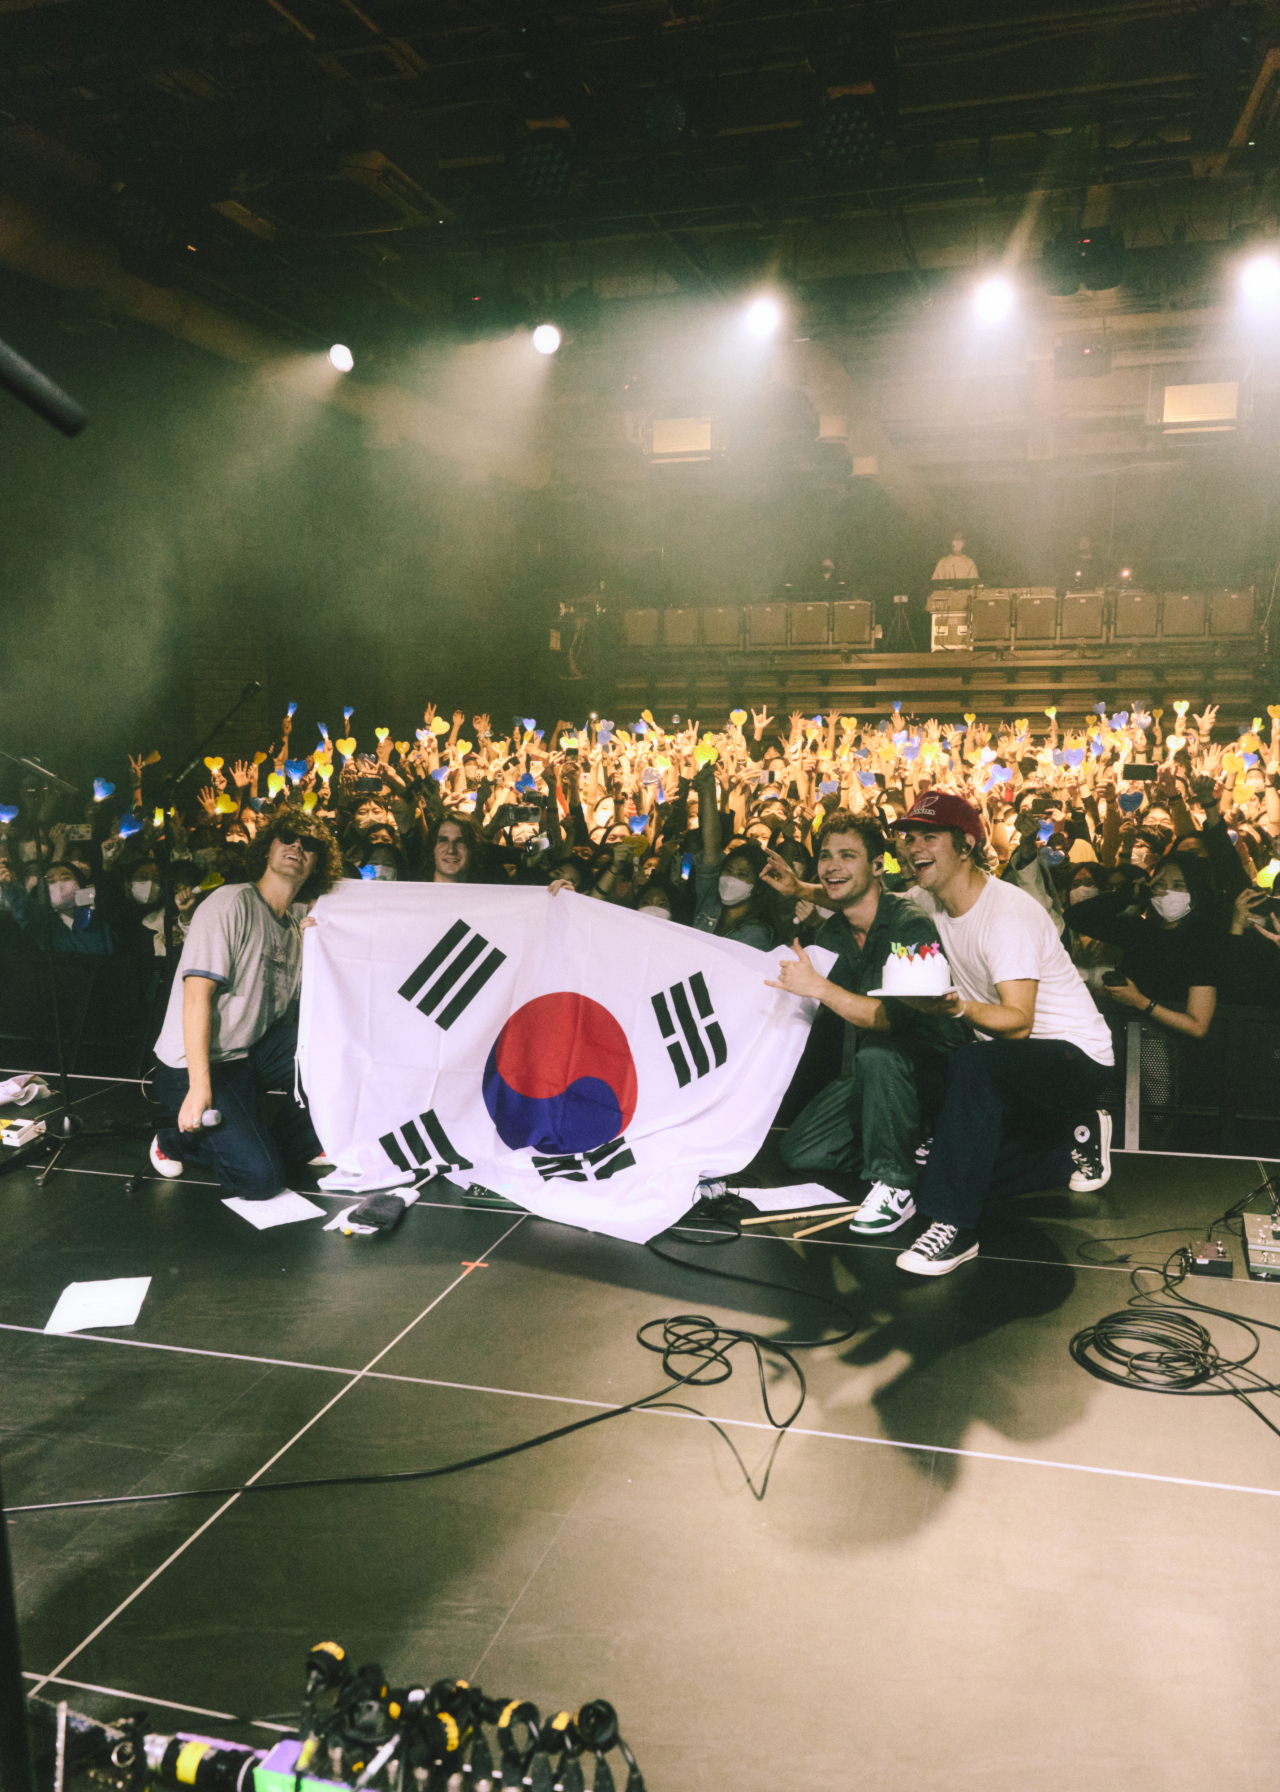 American alt-pop band almost monday takes photos with concertgoers while holding Taegeukgi, the flag of Korea, after its first live concert in Korea. The band held a concert at Watcha Hall in Mapo-gu, in western Seoul, on Friday. (Universal Music Korea)